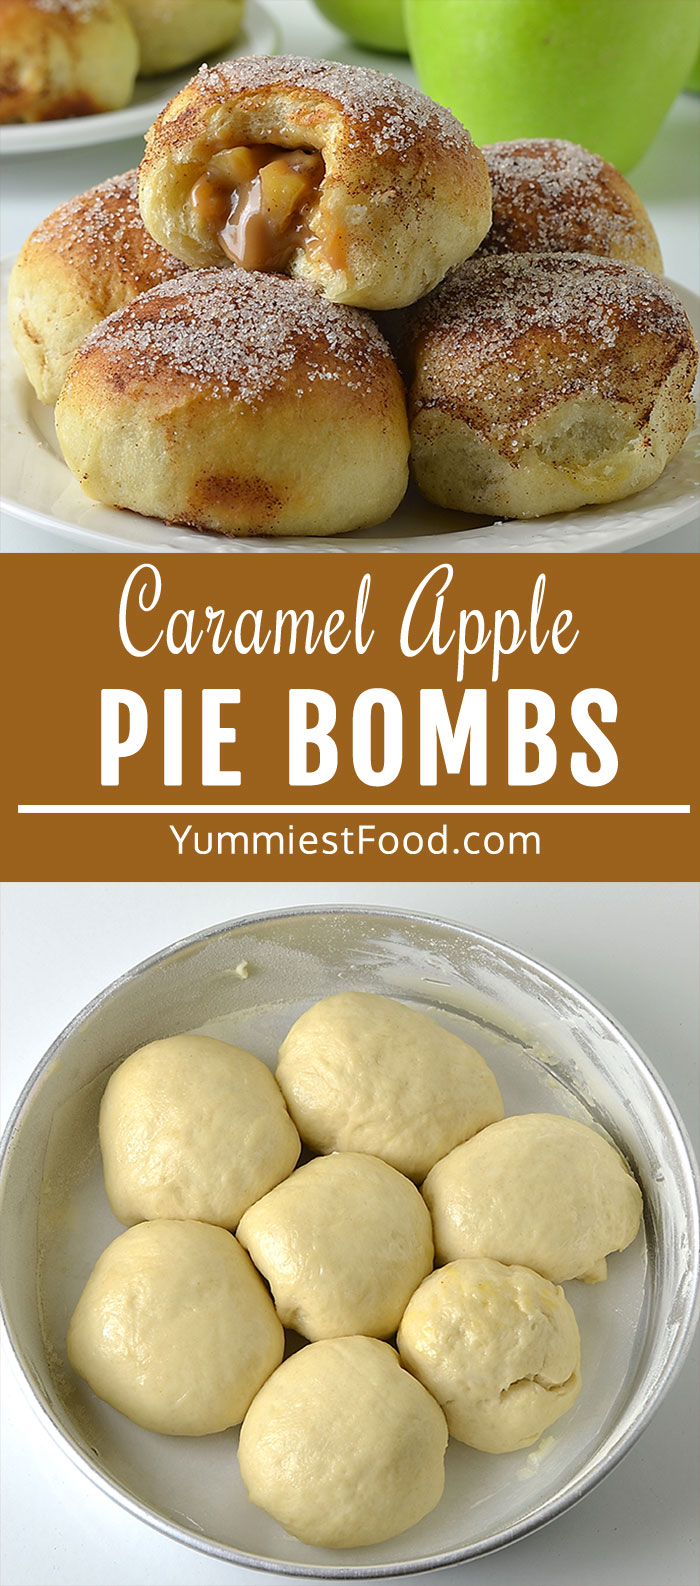 Caramel Apple Pie Bombs are little balls of dough filled with delicious apple pie filling and brushed with melted butter and cinnamon sugar! Easy and so delicious mini sized desserts are perfect for a single serving